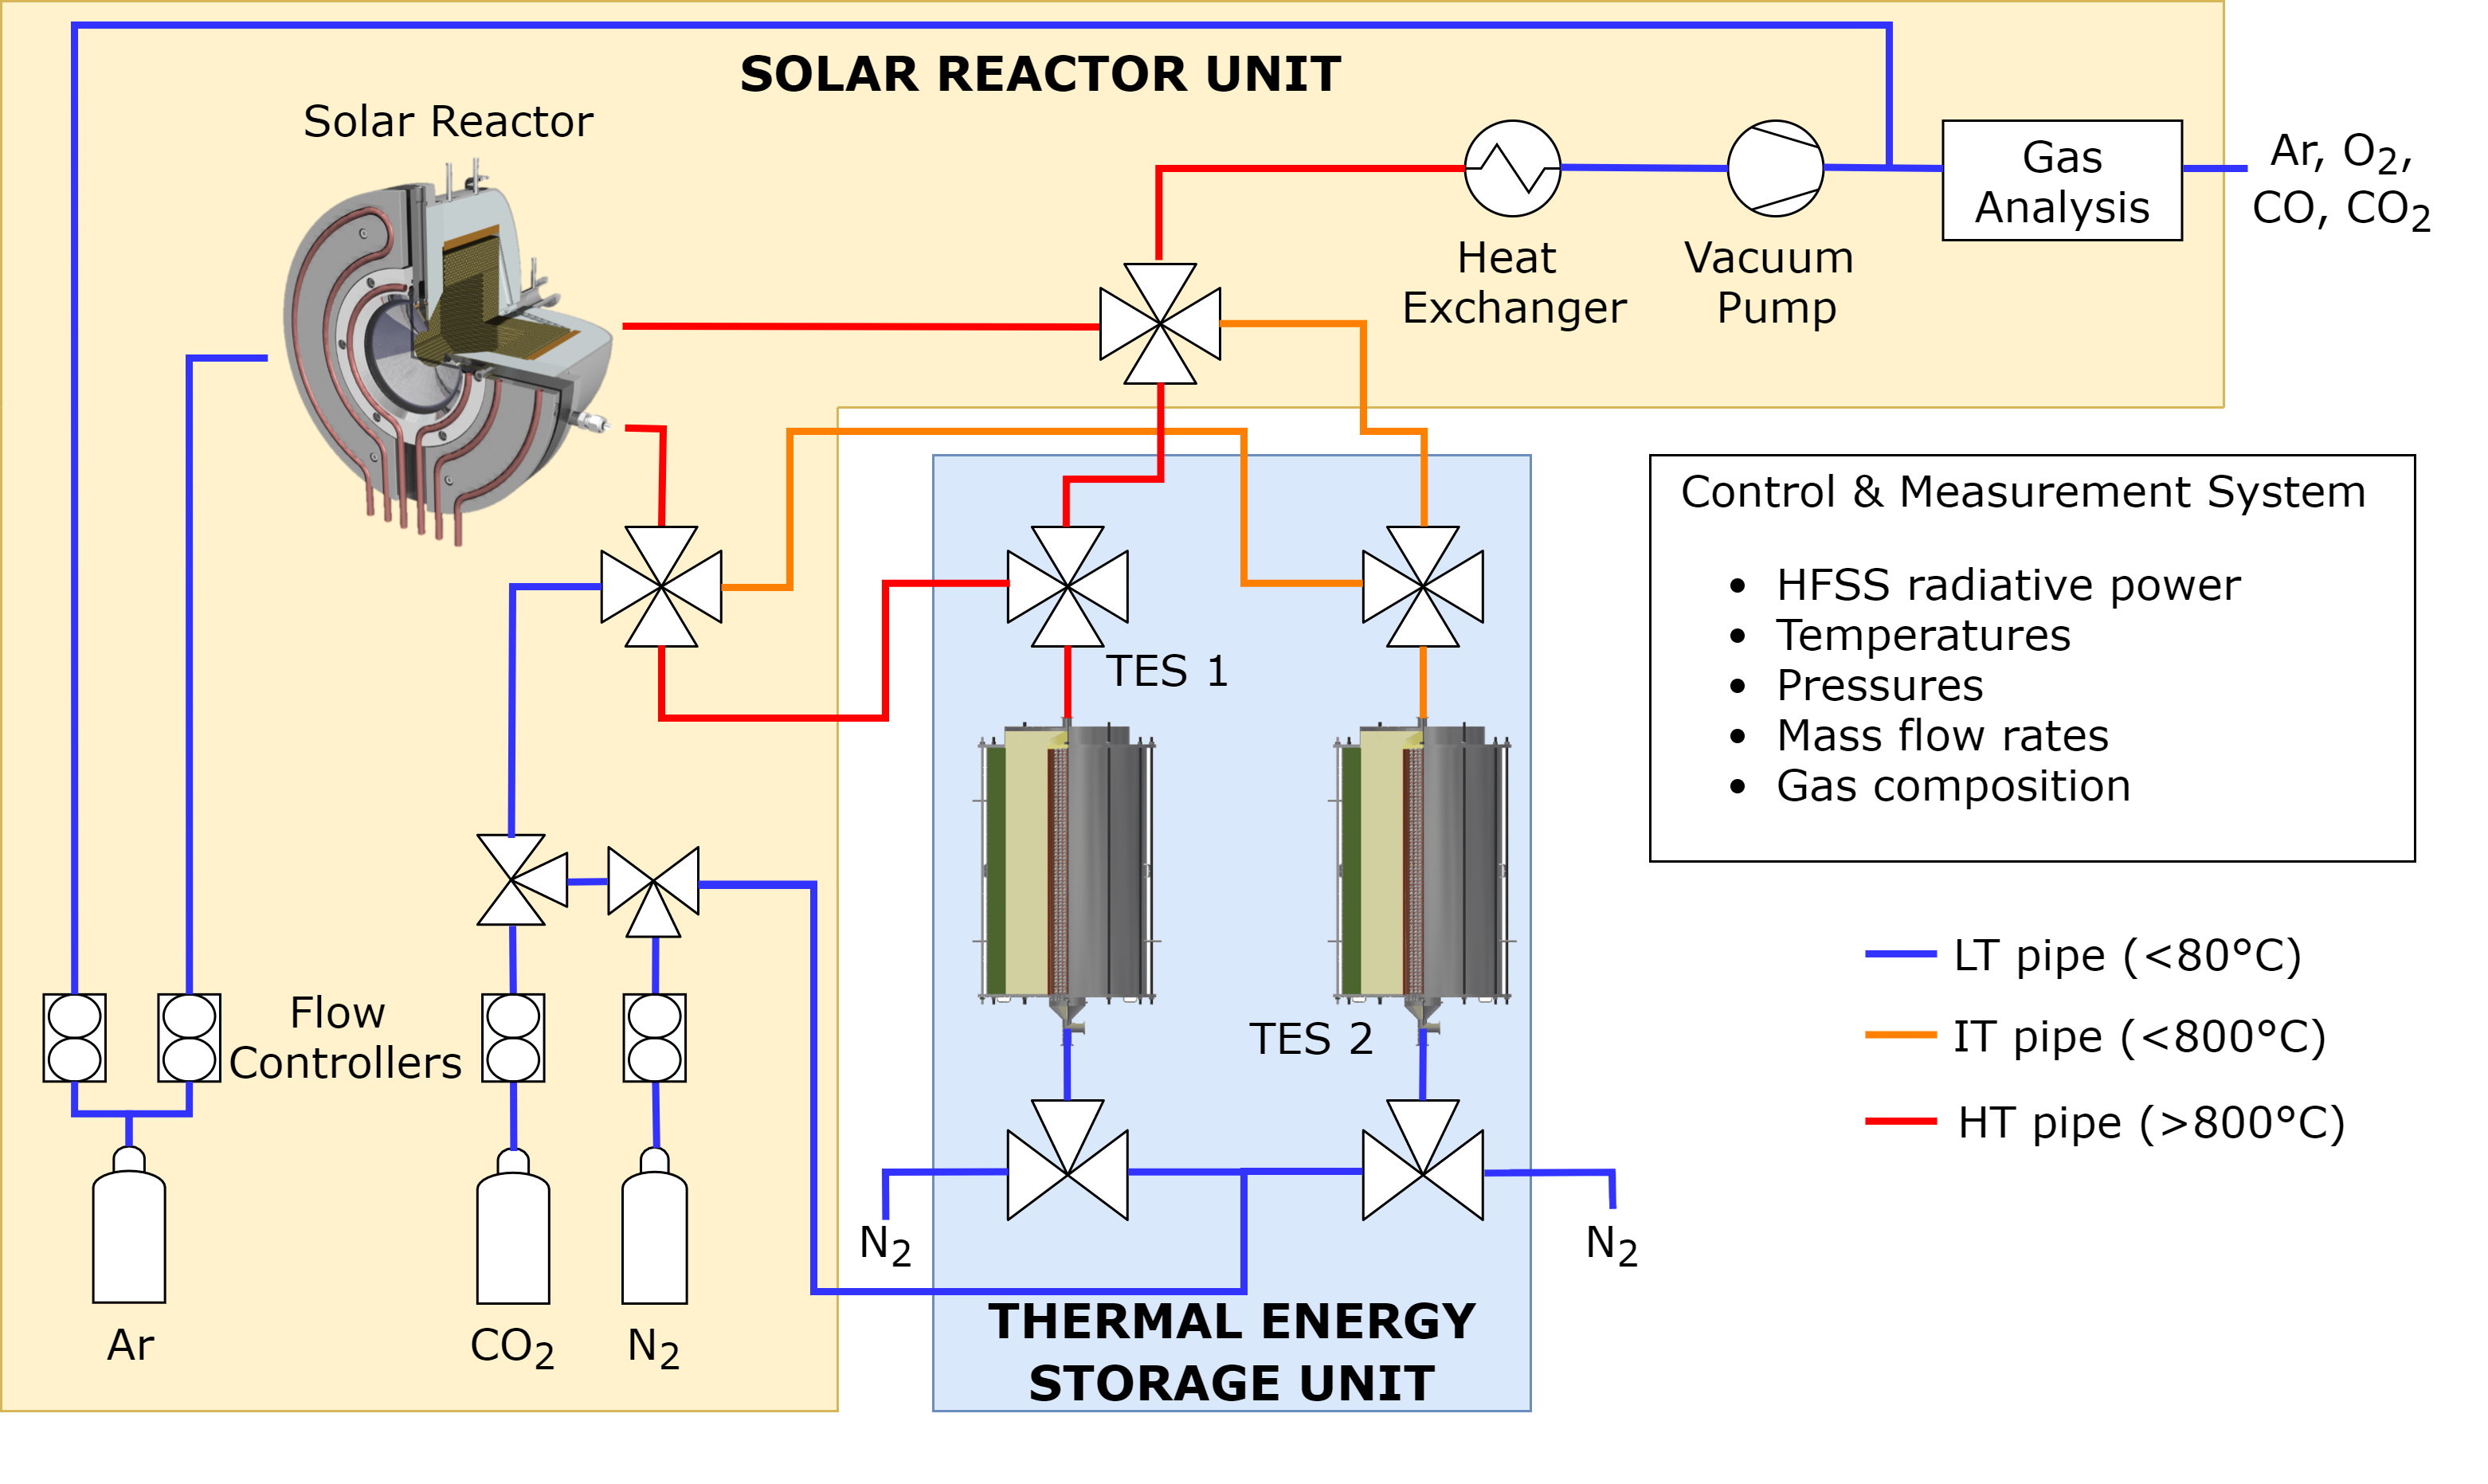 Schematic for the ETH Zurich solar reactor with heat recovery